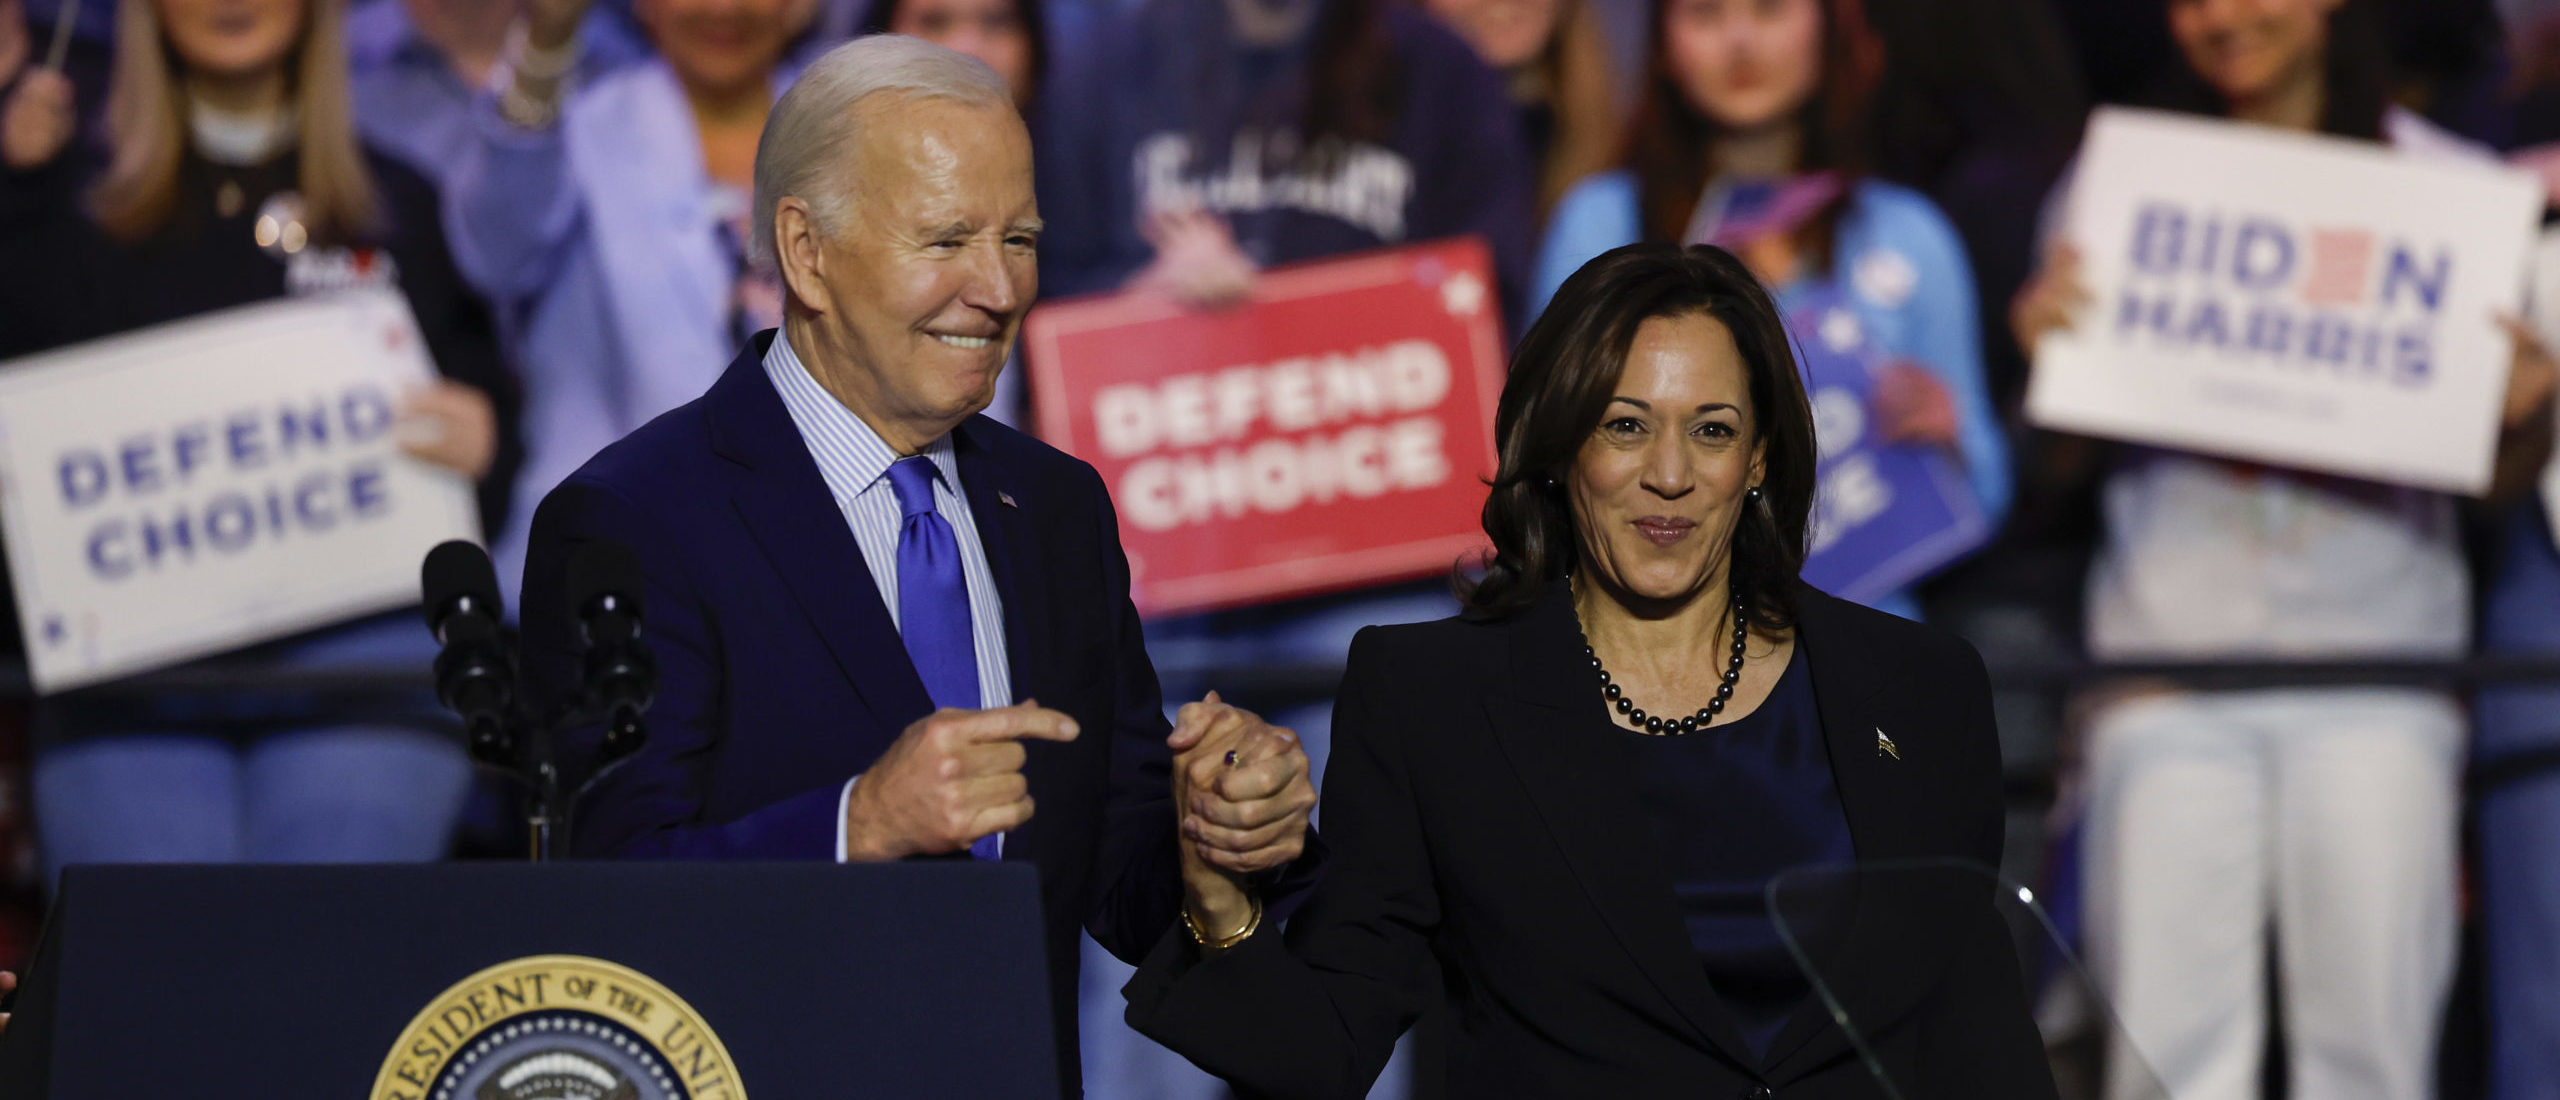 U.S. President Joe Biden and U.S. Vice President Kamala Harris stand onstage and wave to the crowd at a ”Reproductive Freedom Campaign Rally" at George Mason University on January 23, 2024 in Manassas, Virginia. During the first joint rally held by the President and Vice President, Biden and Harris spoke on what they perceive as a threat to reproductive rights. (Photo by Anna Moneymaker/Getty Images)